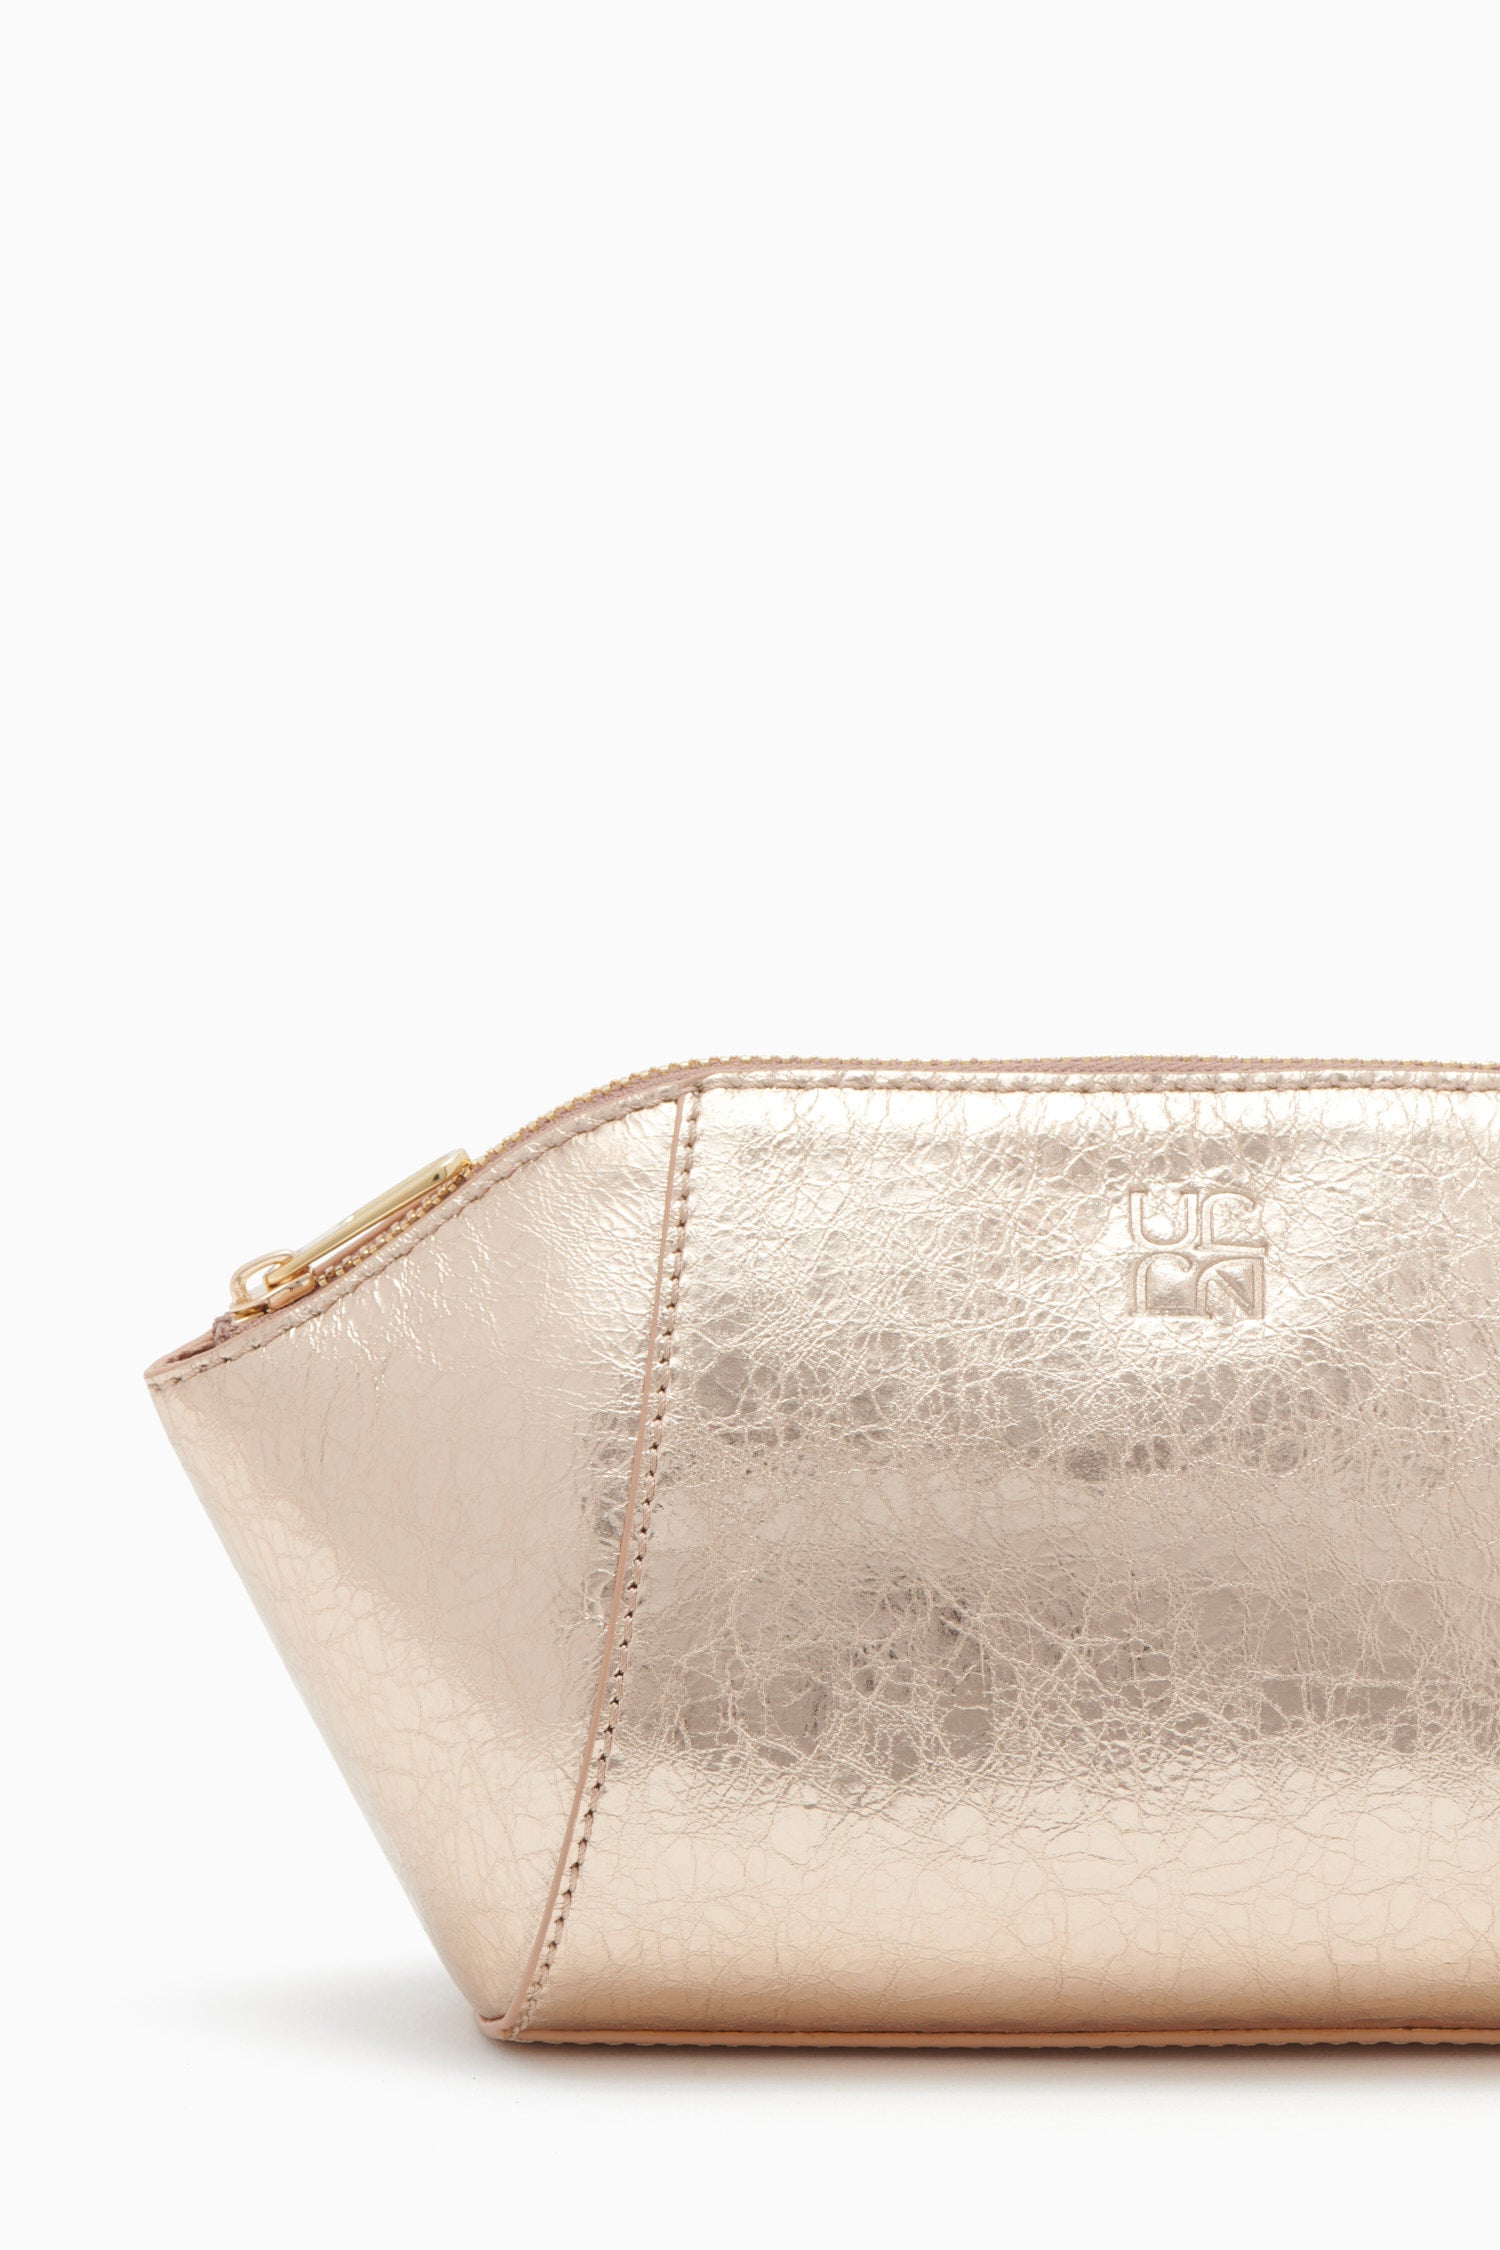 Ulla Johnson Imogen Large Makeup Pouch - Champagne